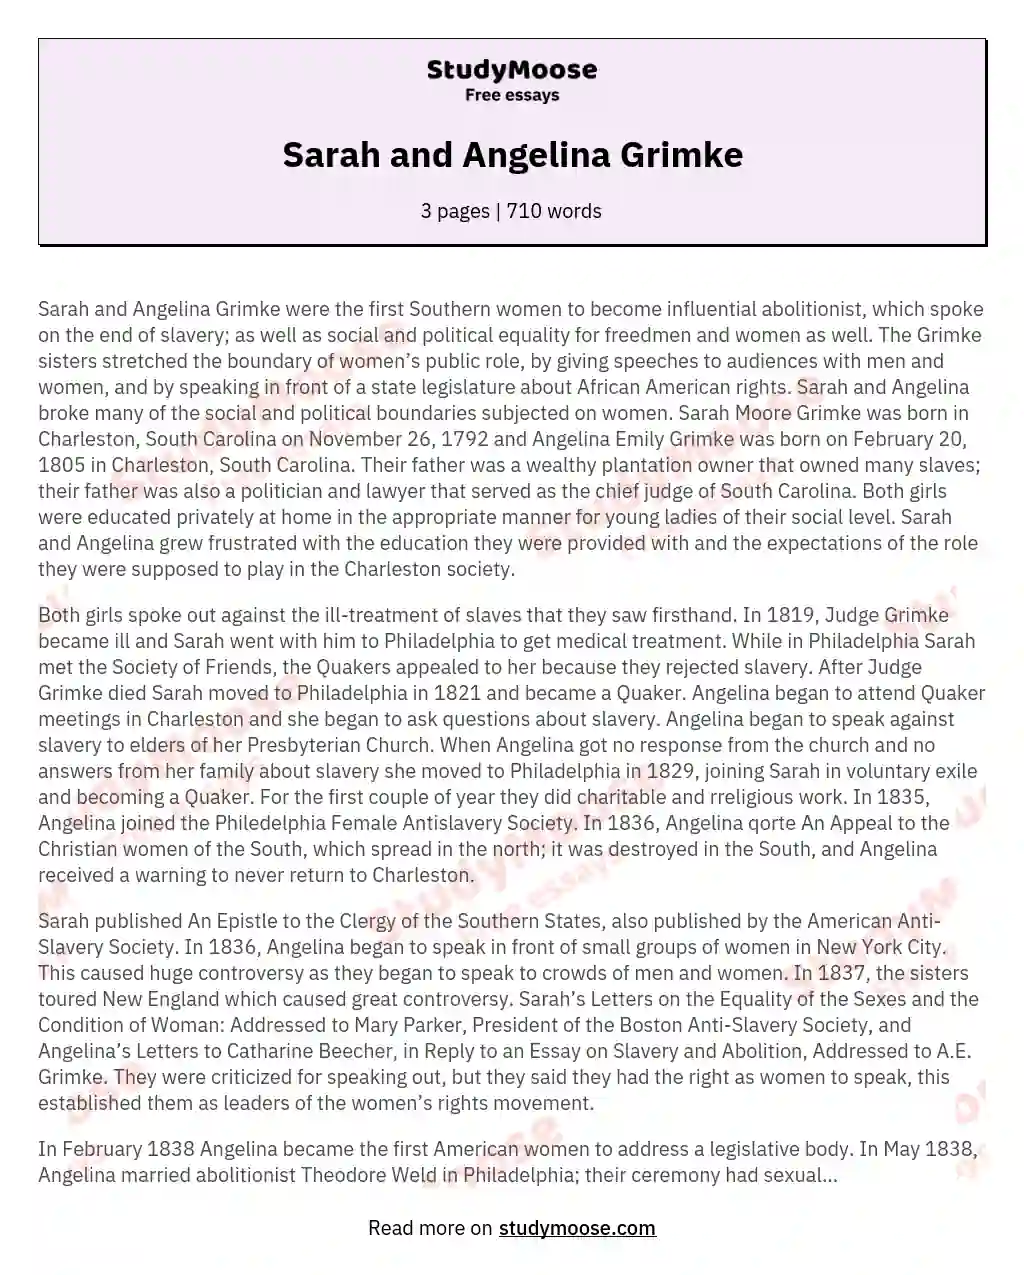 Sarah and Angelina Grimke: Pioneers of Abolitionism and Women's Rights essay